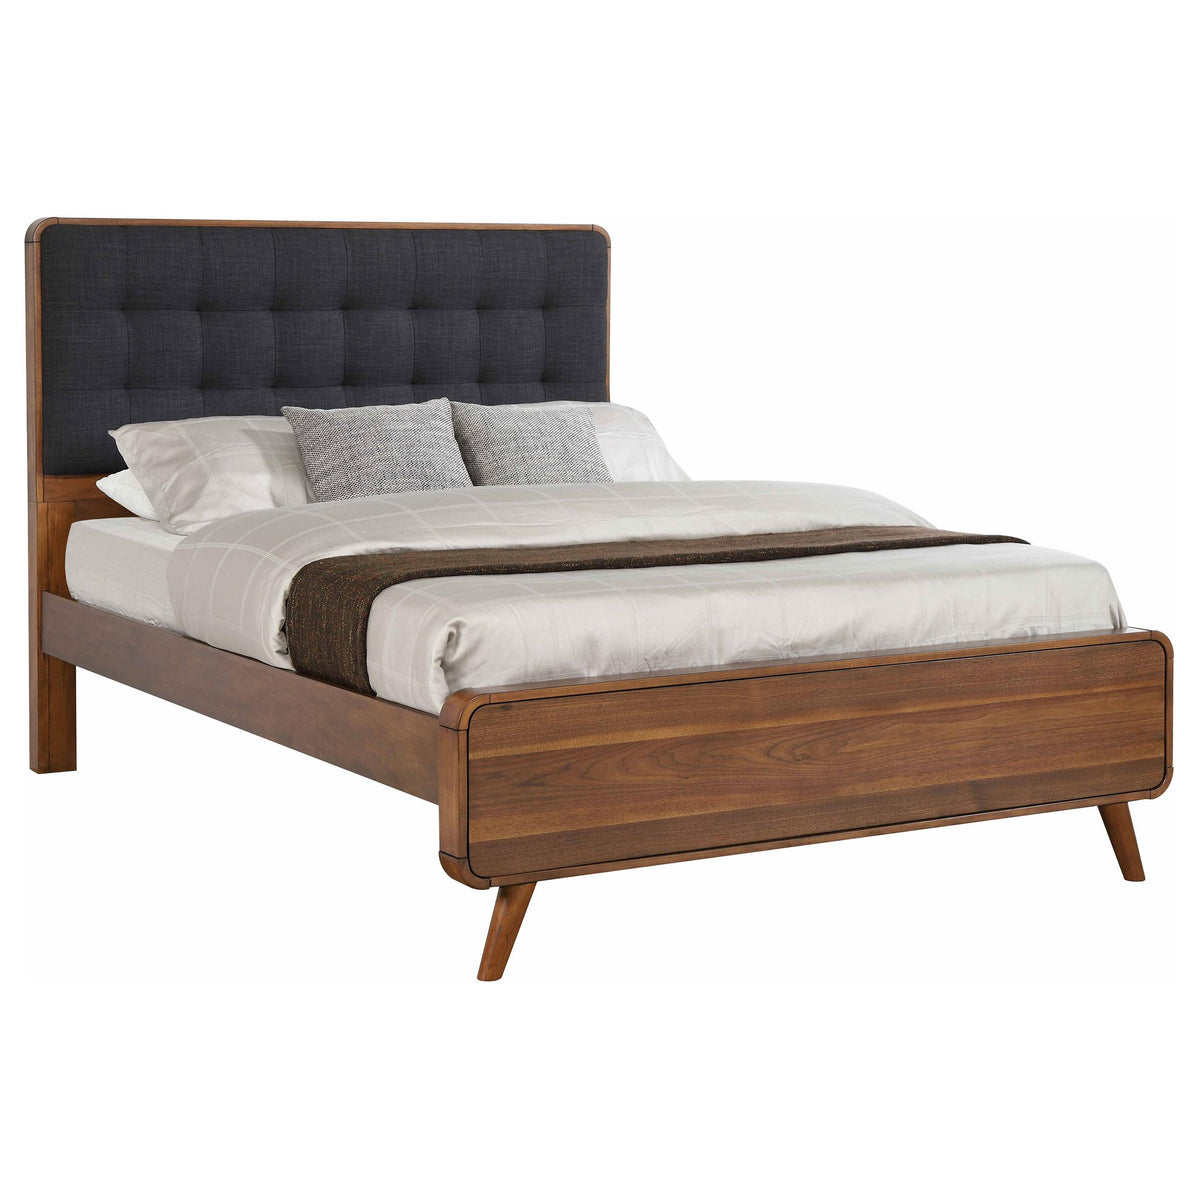 Robyn California King Bed with Upholstered Headboard Dark Walnut  Las Vegas Furniture Stores